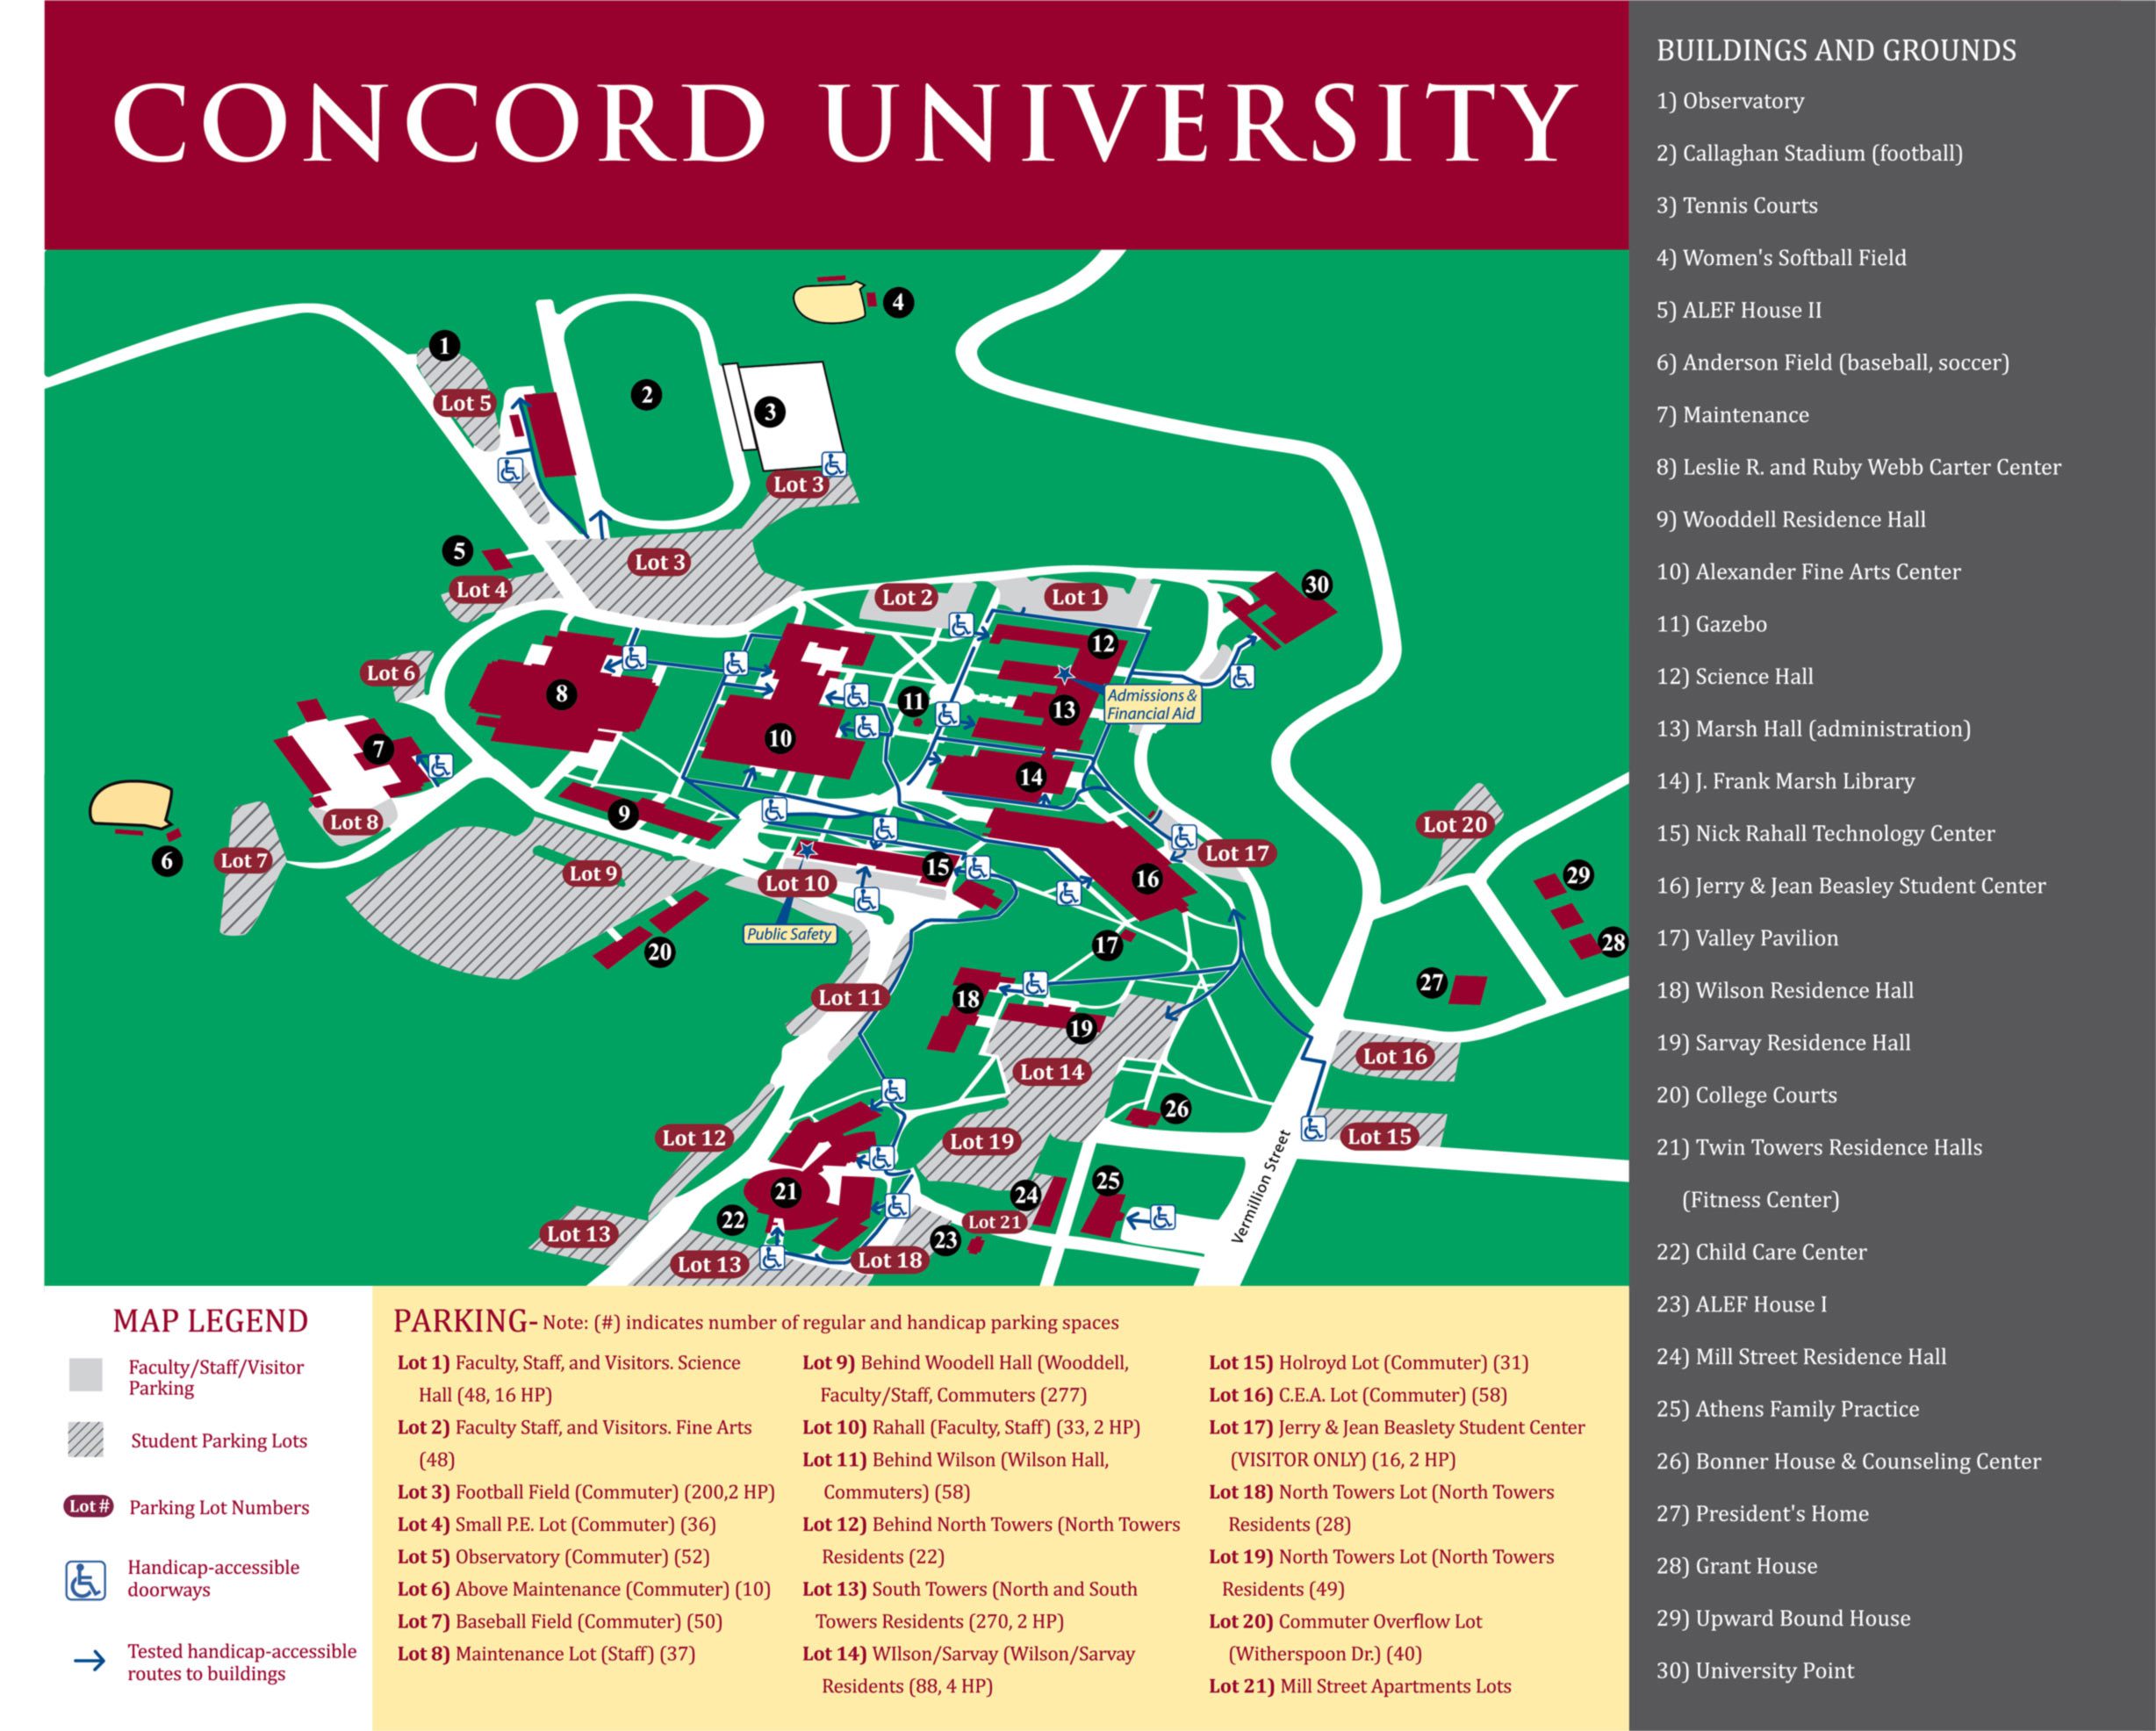 A map of the buildings and parking lots on campus